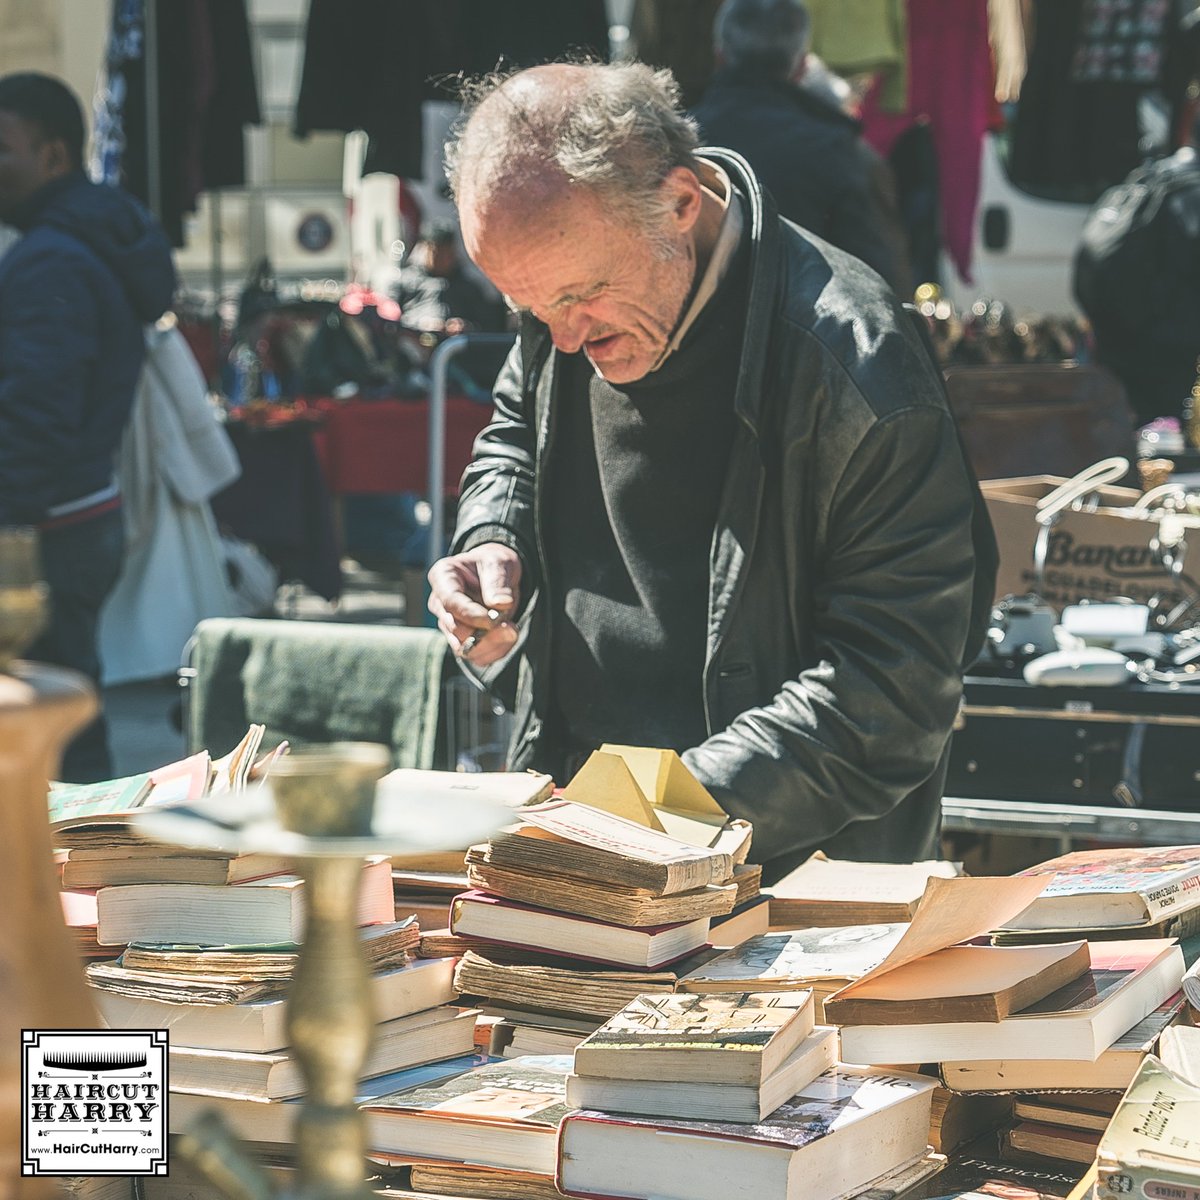 A local weekend flea-market in #Paris #France !  Great for people watching, #StreetPhotography and immersing in local culture.     

#RealMenHCH #RealMen #HaircutHarry #ParisTourism #Explore #RealMenHCH #Travel #Inspire #BeKind #Explore #LiveLife #WanderLust